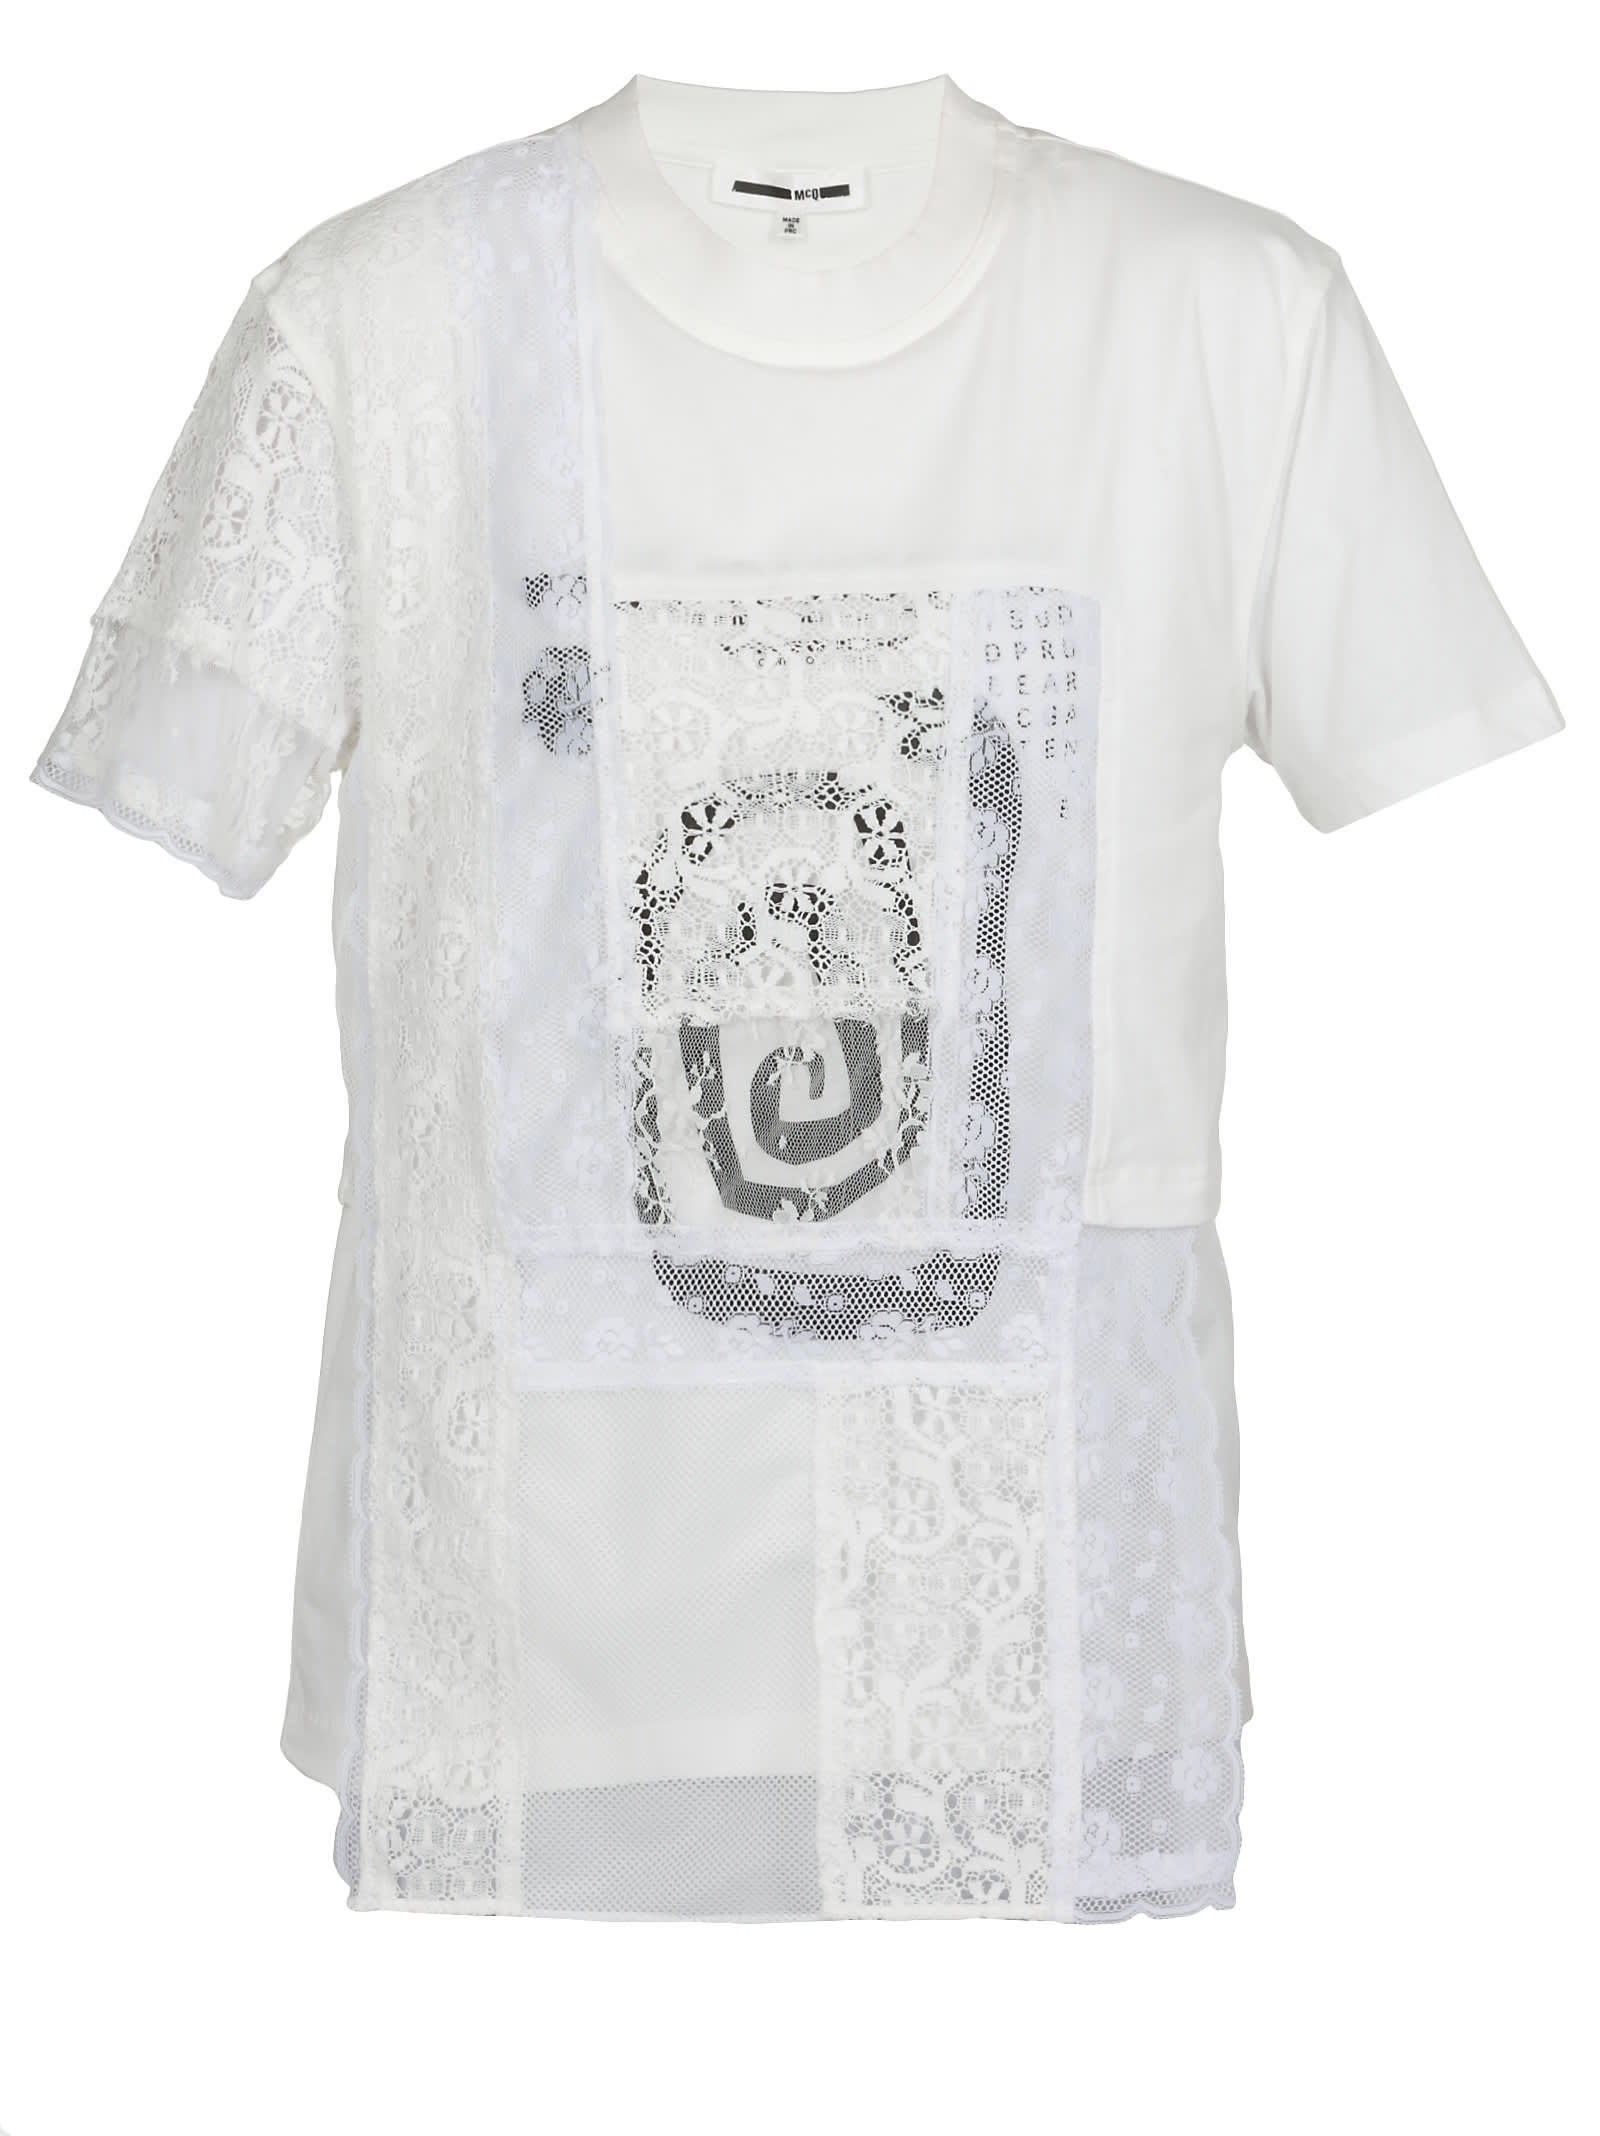 Mcq By Alexander Mcqueen Lace T-shirt In White/cream